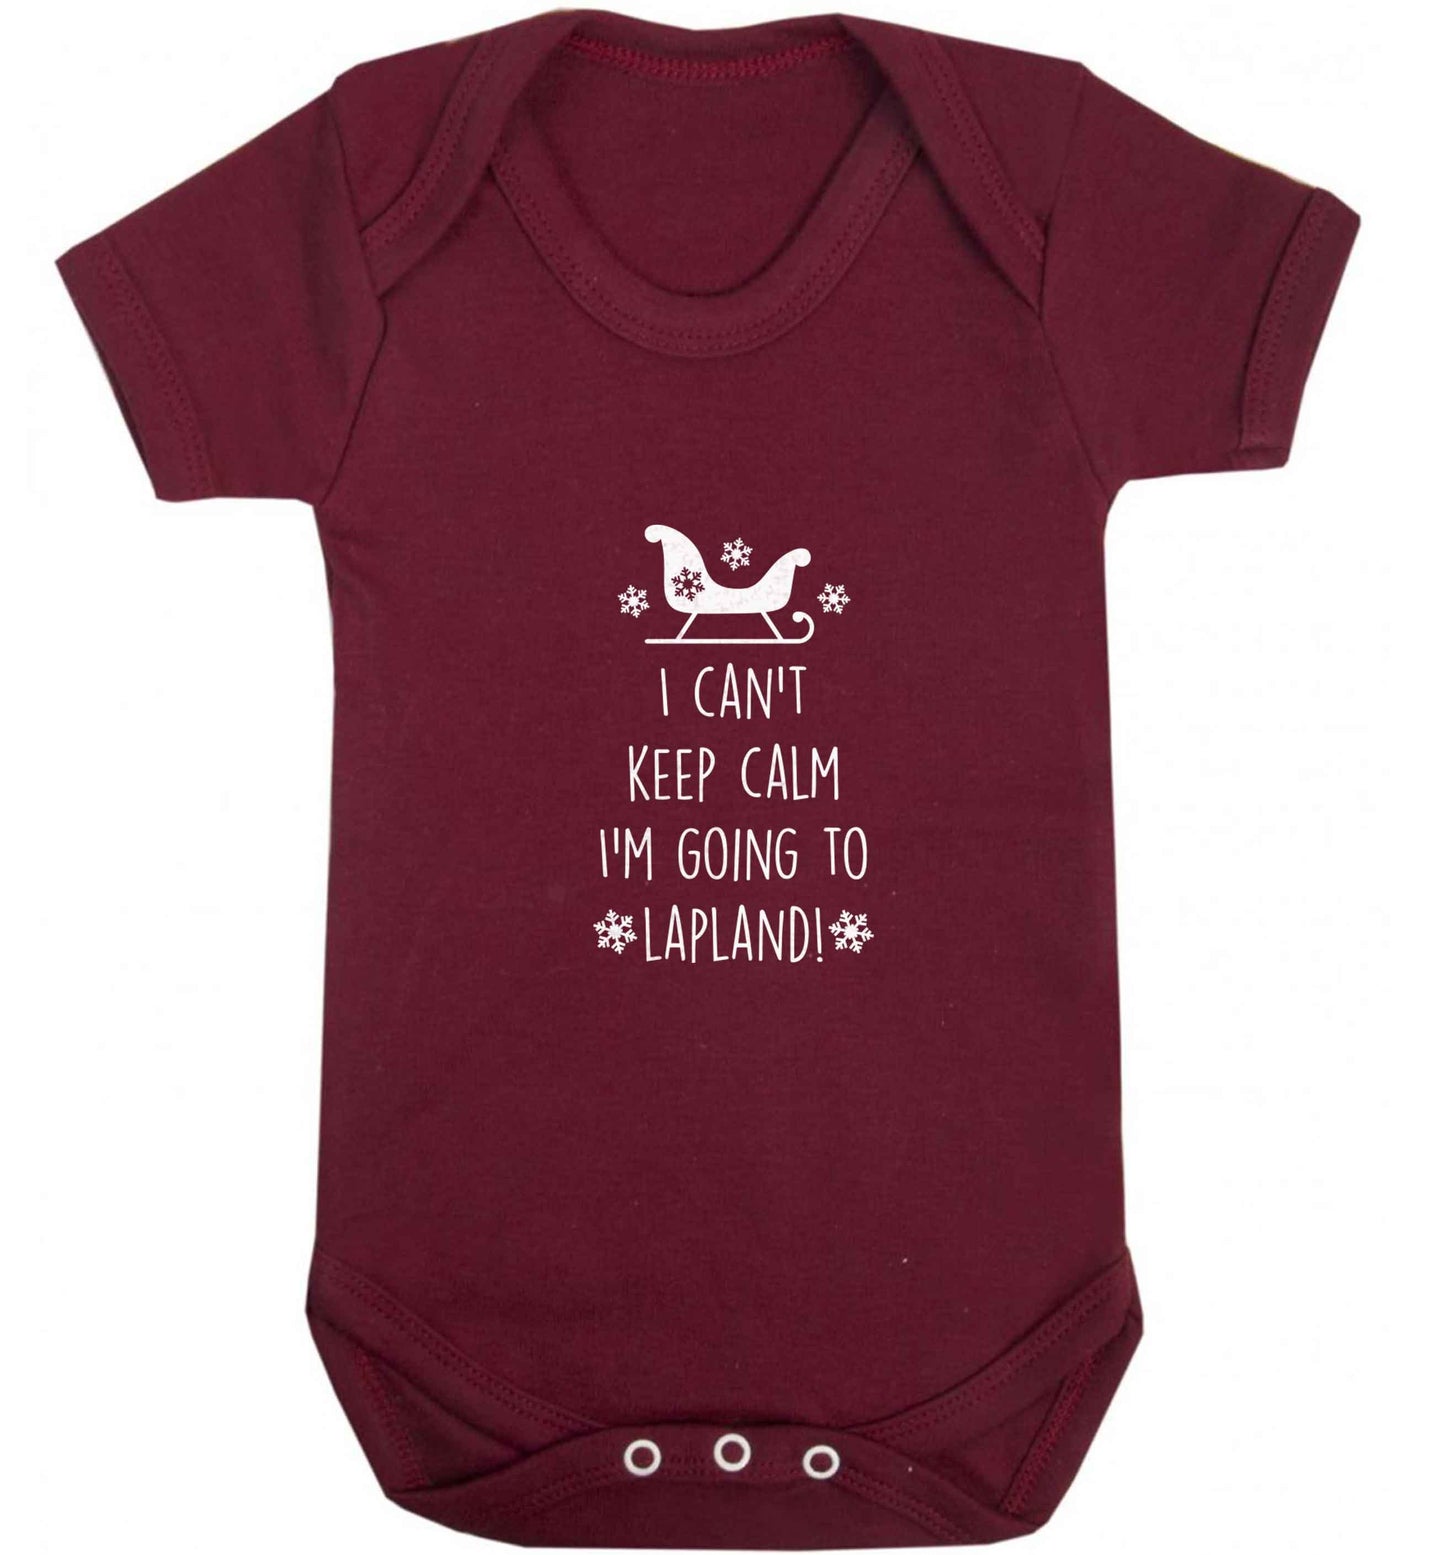 I can't keep calm I'm going to Lapland baby vest maroon 18-24 months